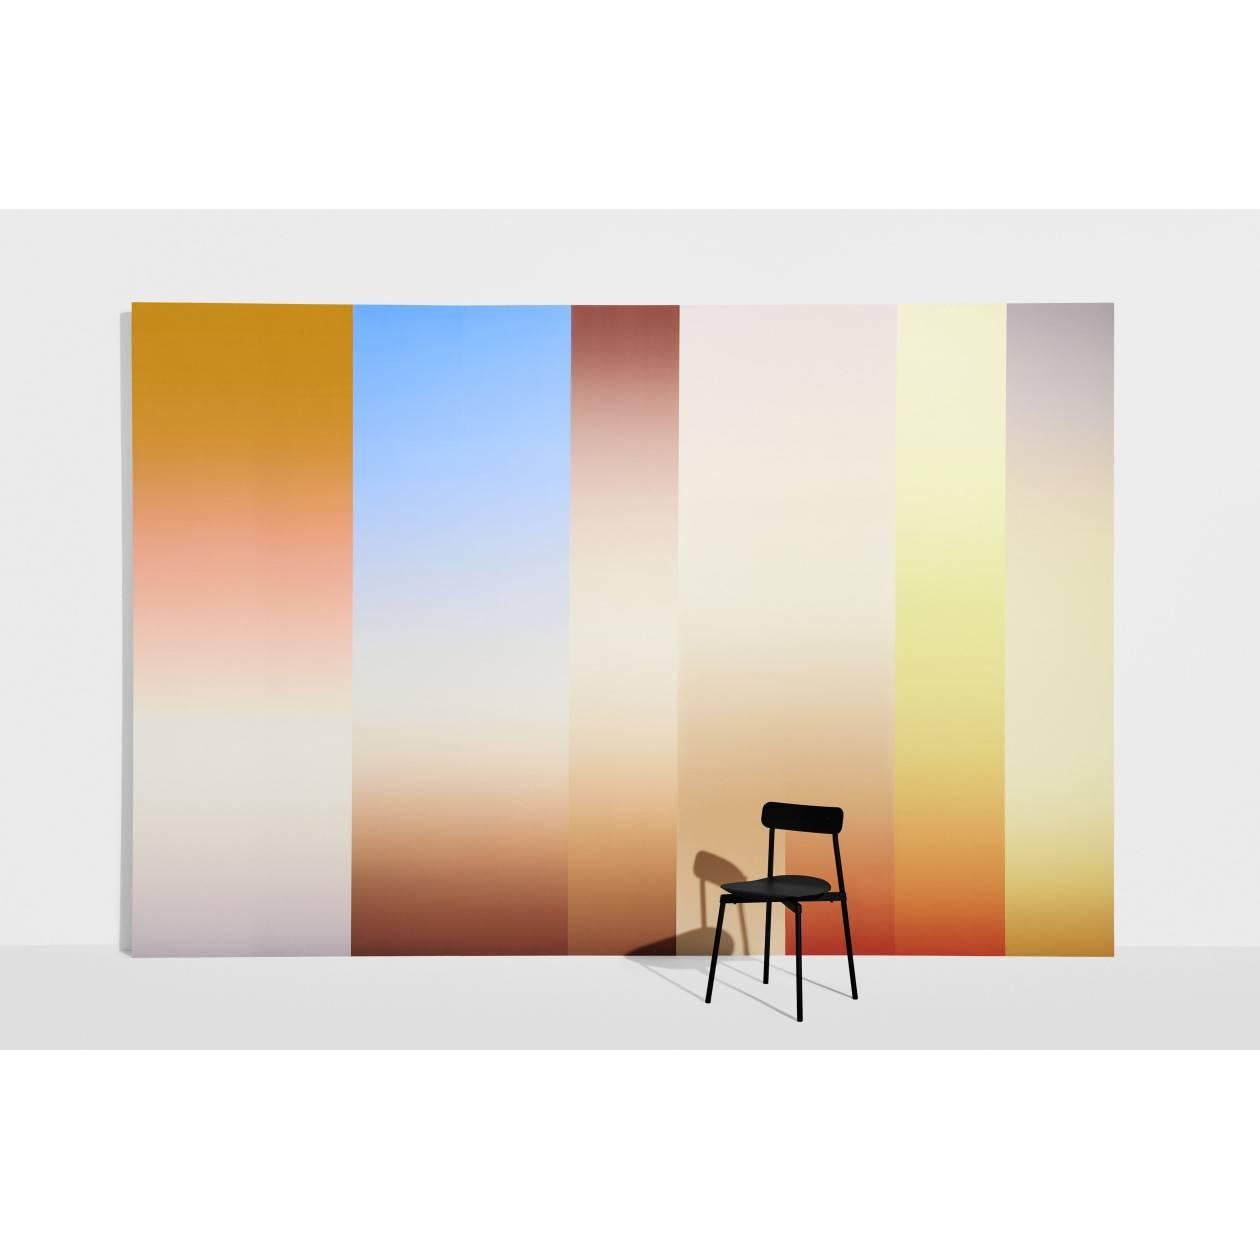 PETITE FRITURE Panorama Wallpaper Mural Ombre, Afternoon by Carole Baijings 1